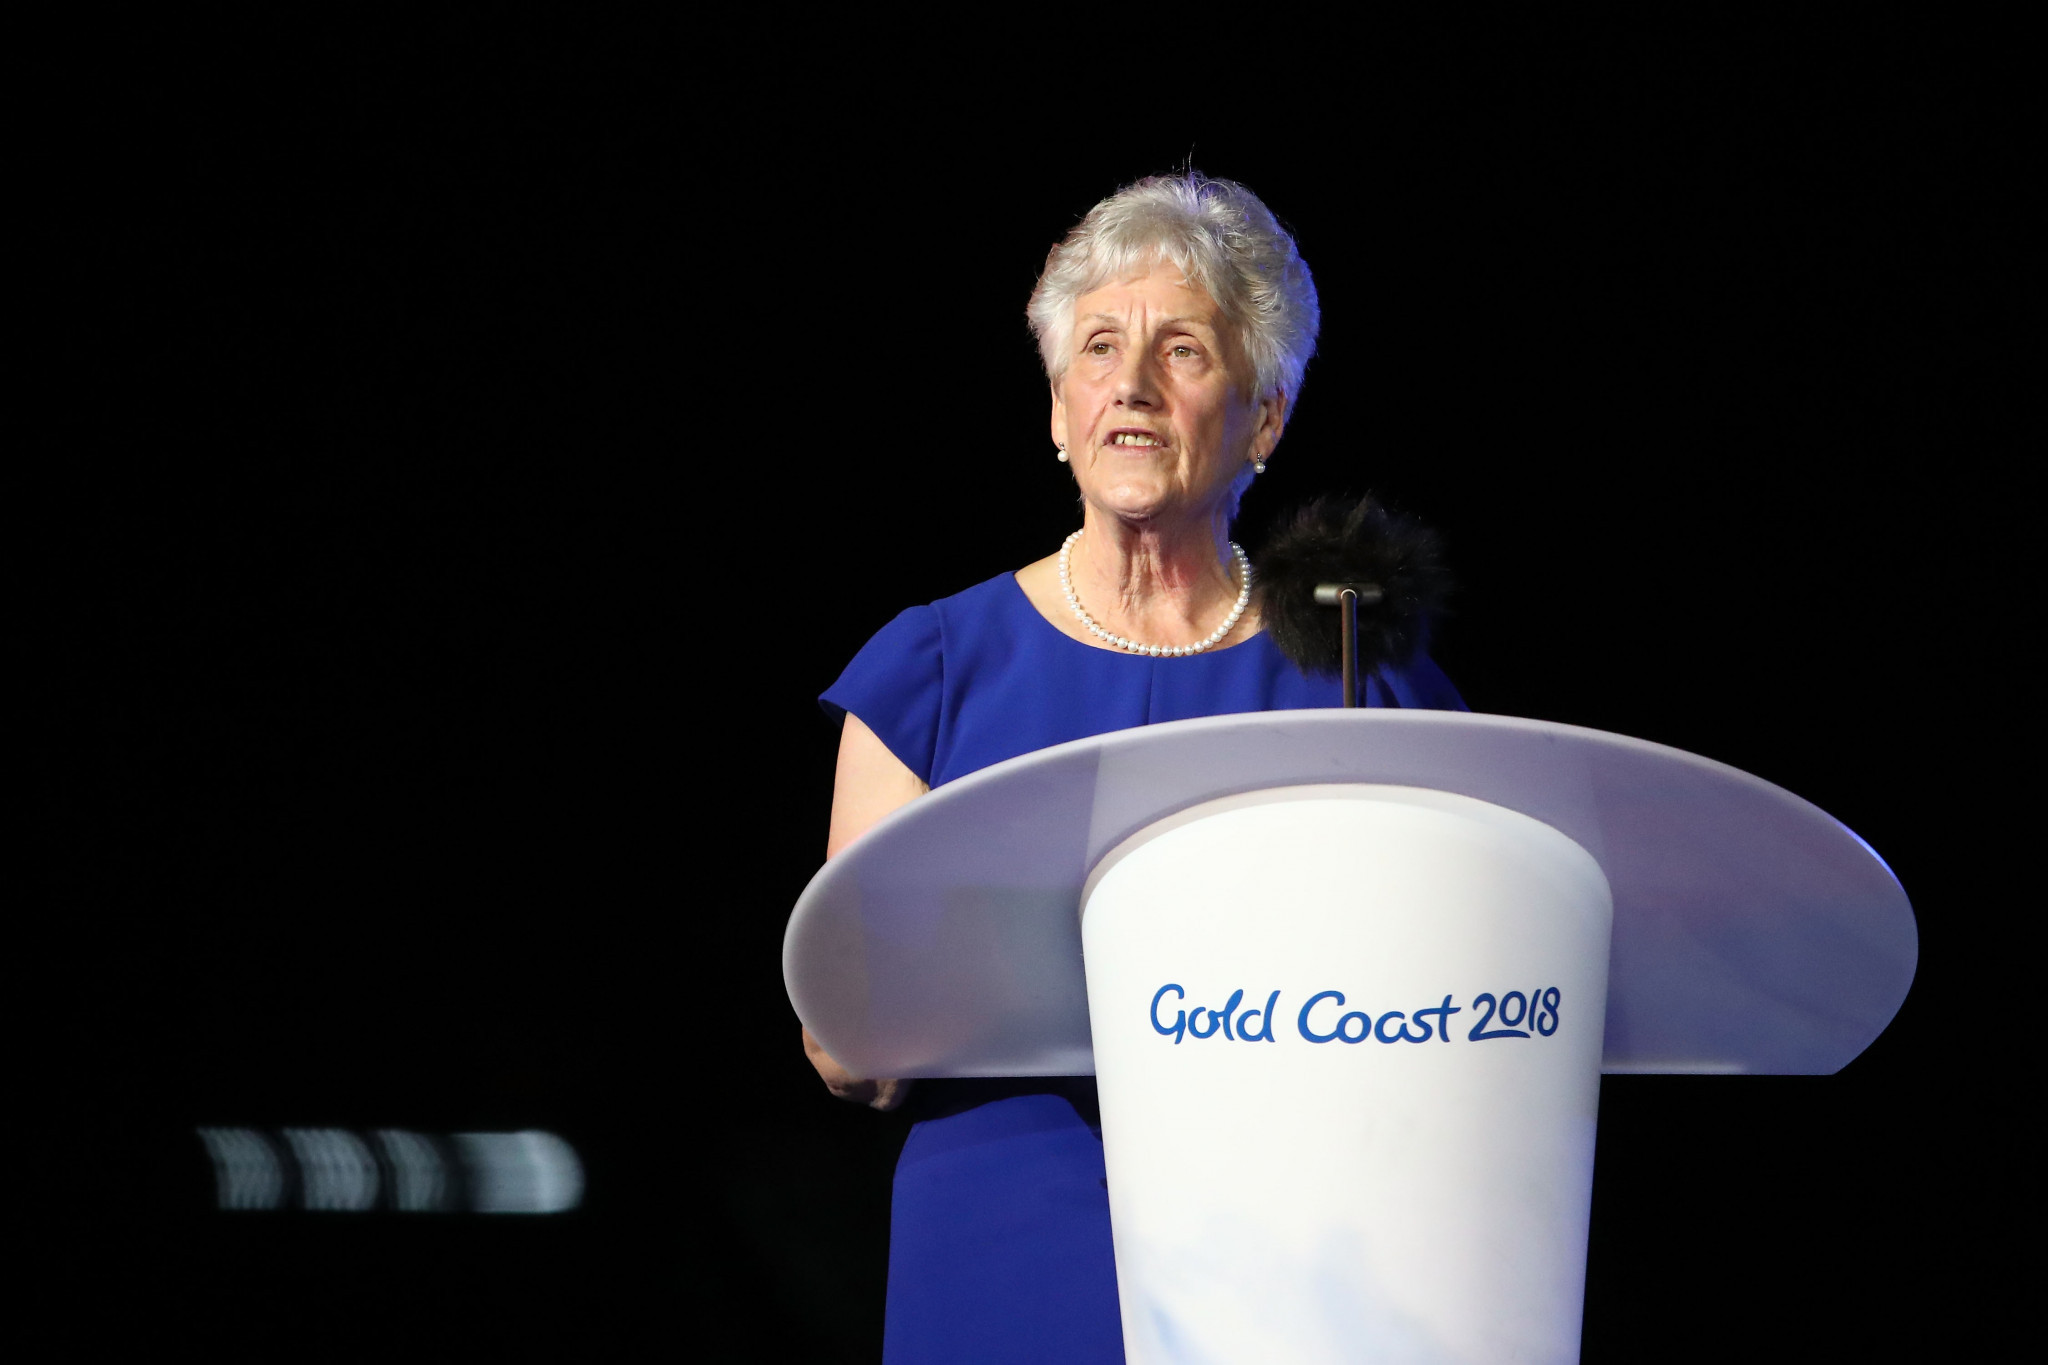 Commonwealth Games Federation President Louise Martin will be up for re-election and a host city for the 2026 Commonwealth Games is due to be picked at the General Assembly in Kigali next year ©Getty Images